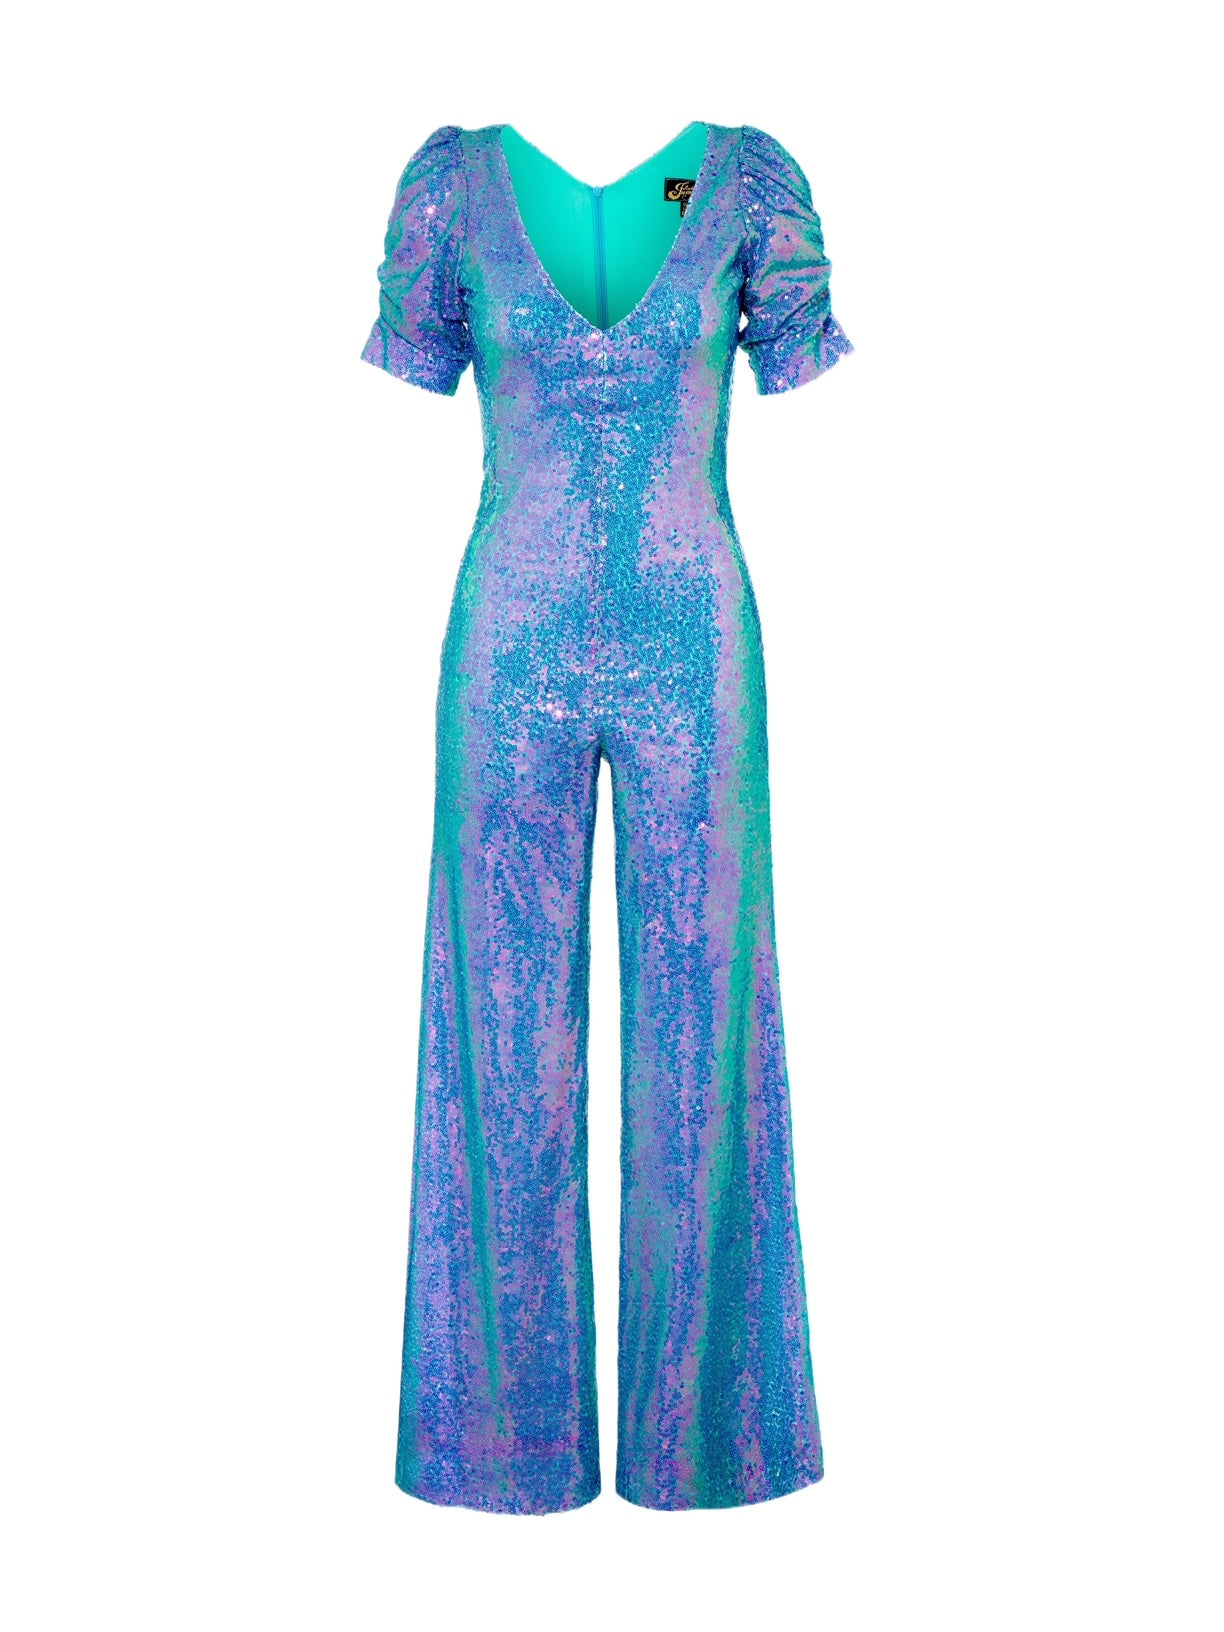 The DOLLY Catsuit - Rock the Jumpsuit